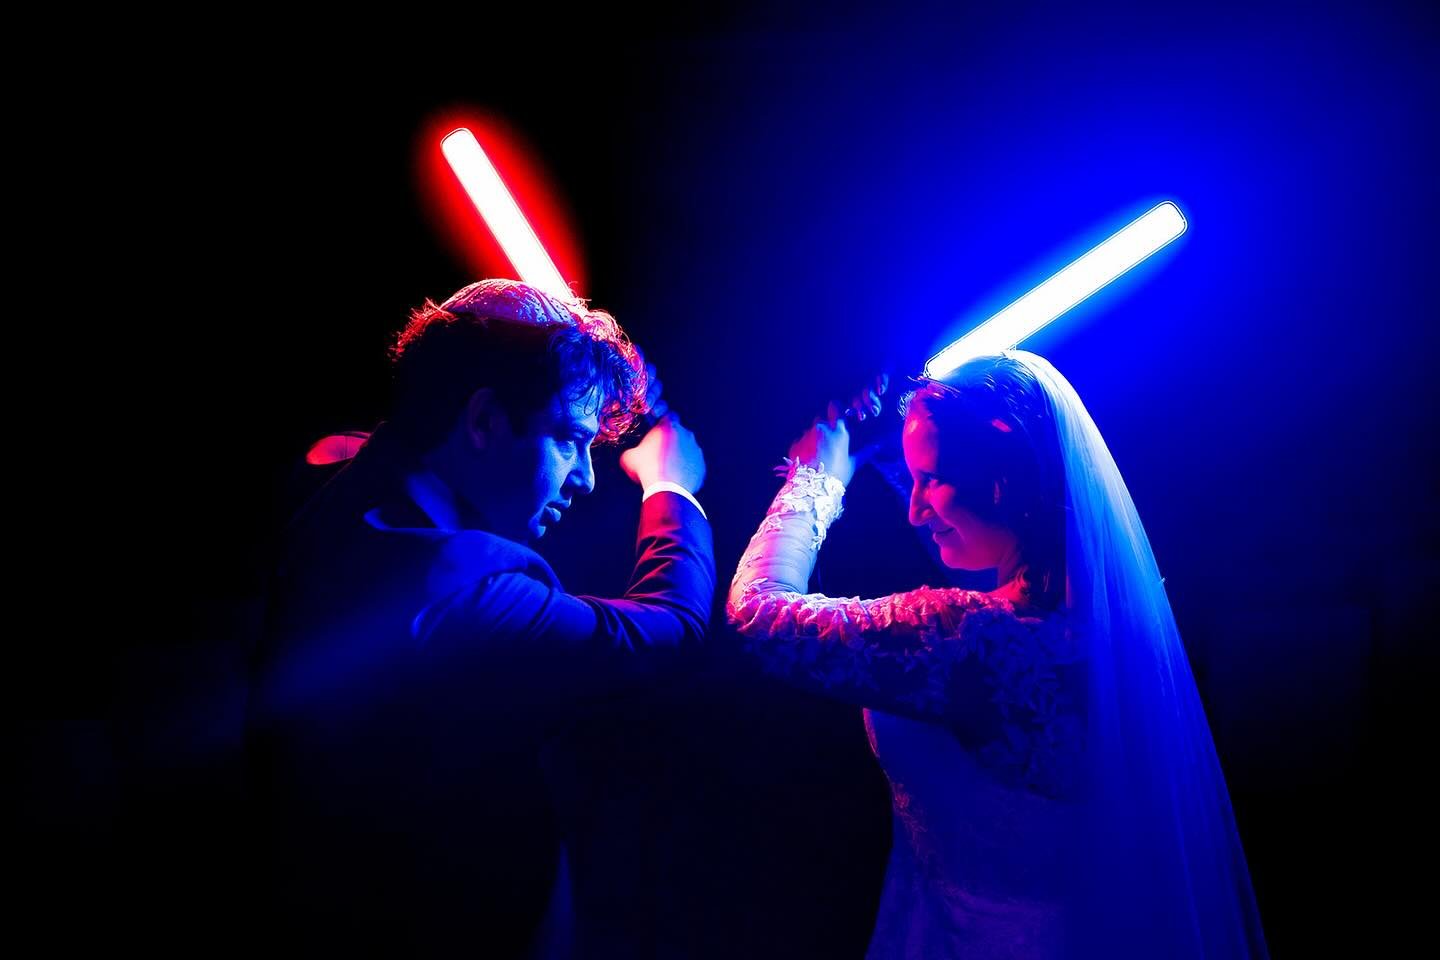 May the 4th be with you, and may you choose to make your wedding day COMPLETELY yours!! 

We were so obsessed with how these photos turned out, and even more so that A+J brought a bit of fantasy and fun to their incredible celebration, truly a reflec